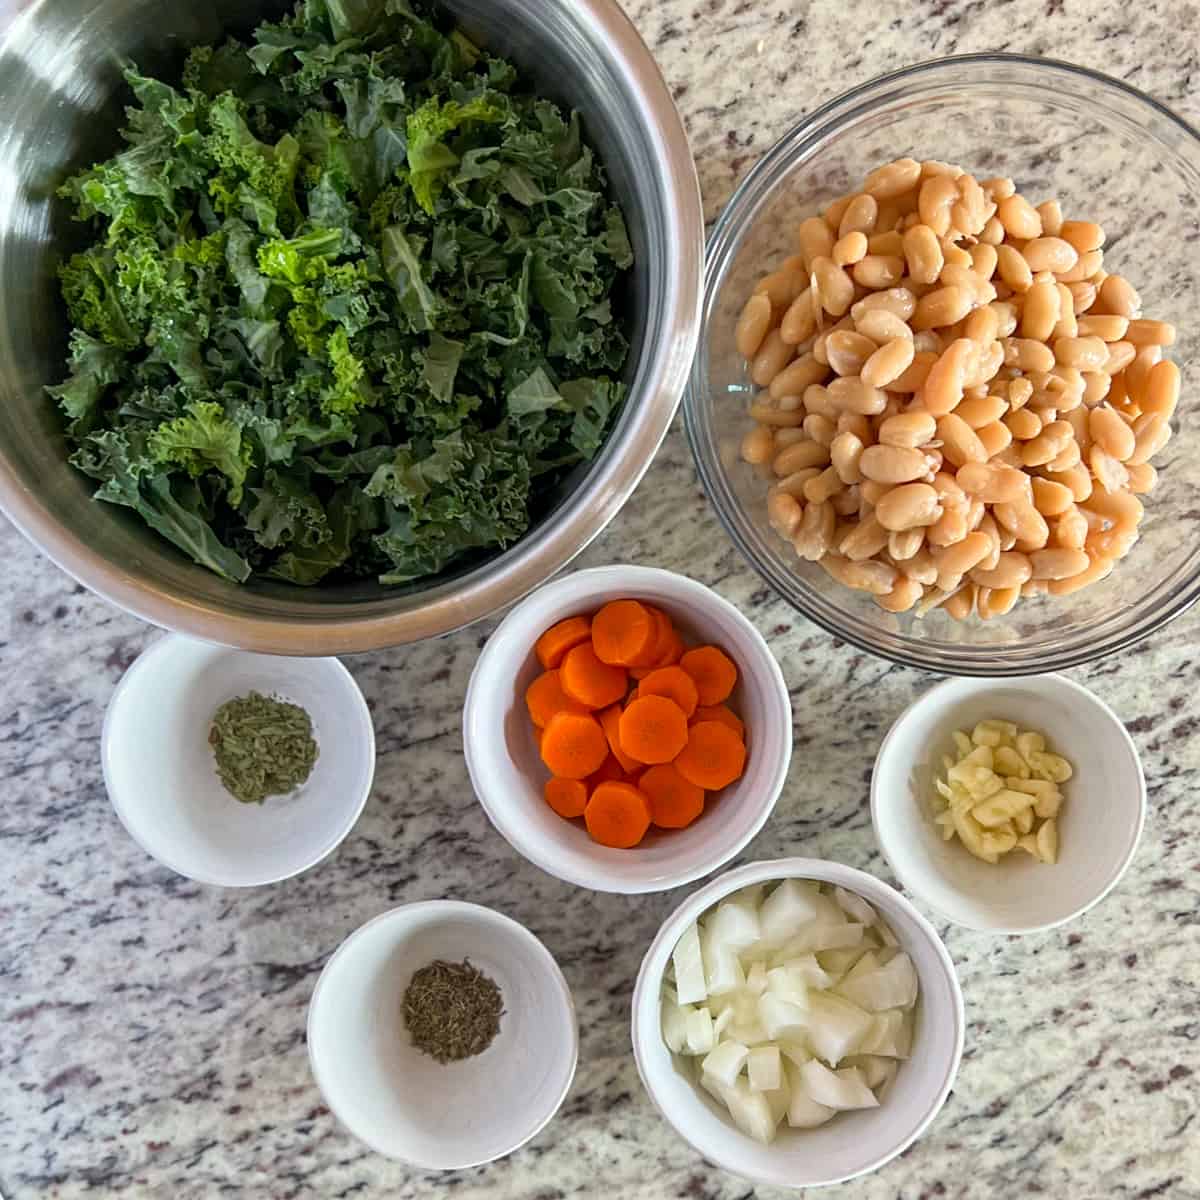 top view of key ingredients used in the recipe: cooked cannellini beans, chopped kale, onion, carrot, garlic, thyme, and tarragon